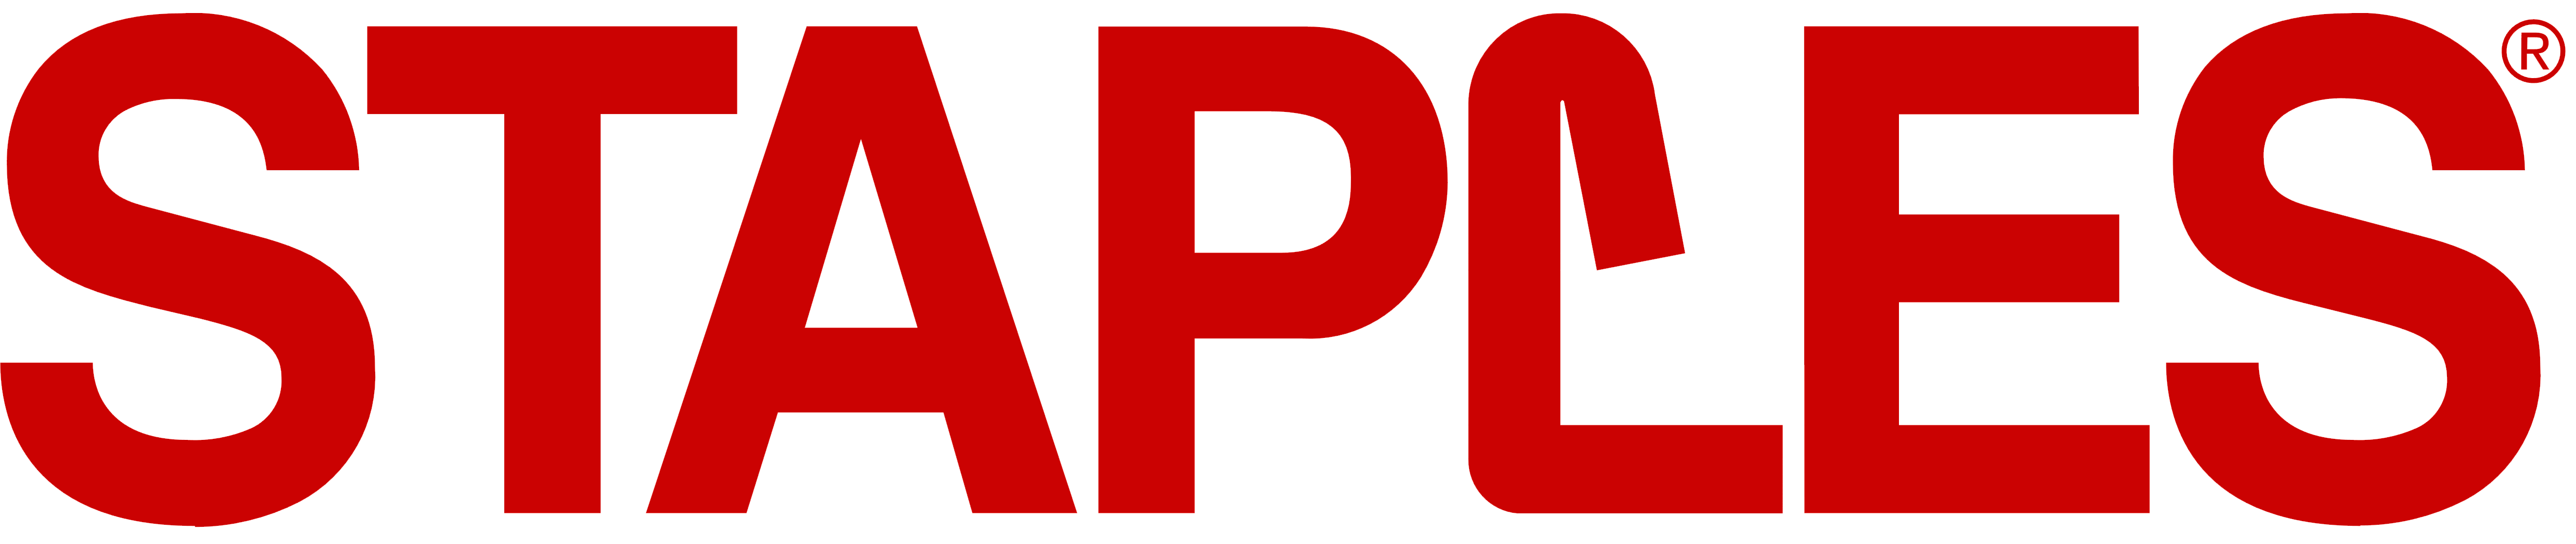 Staples Old Logo - Staples Old Logo Png Images